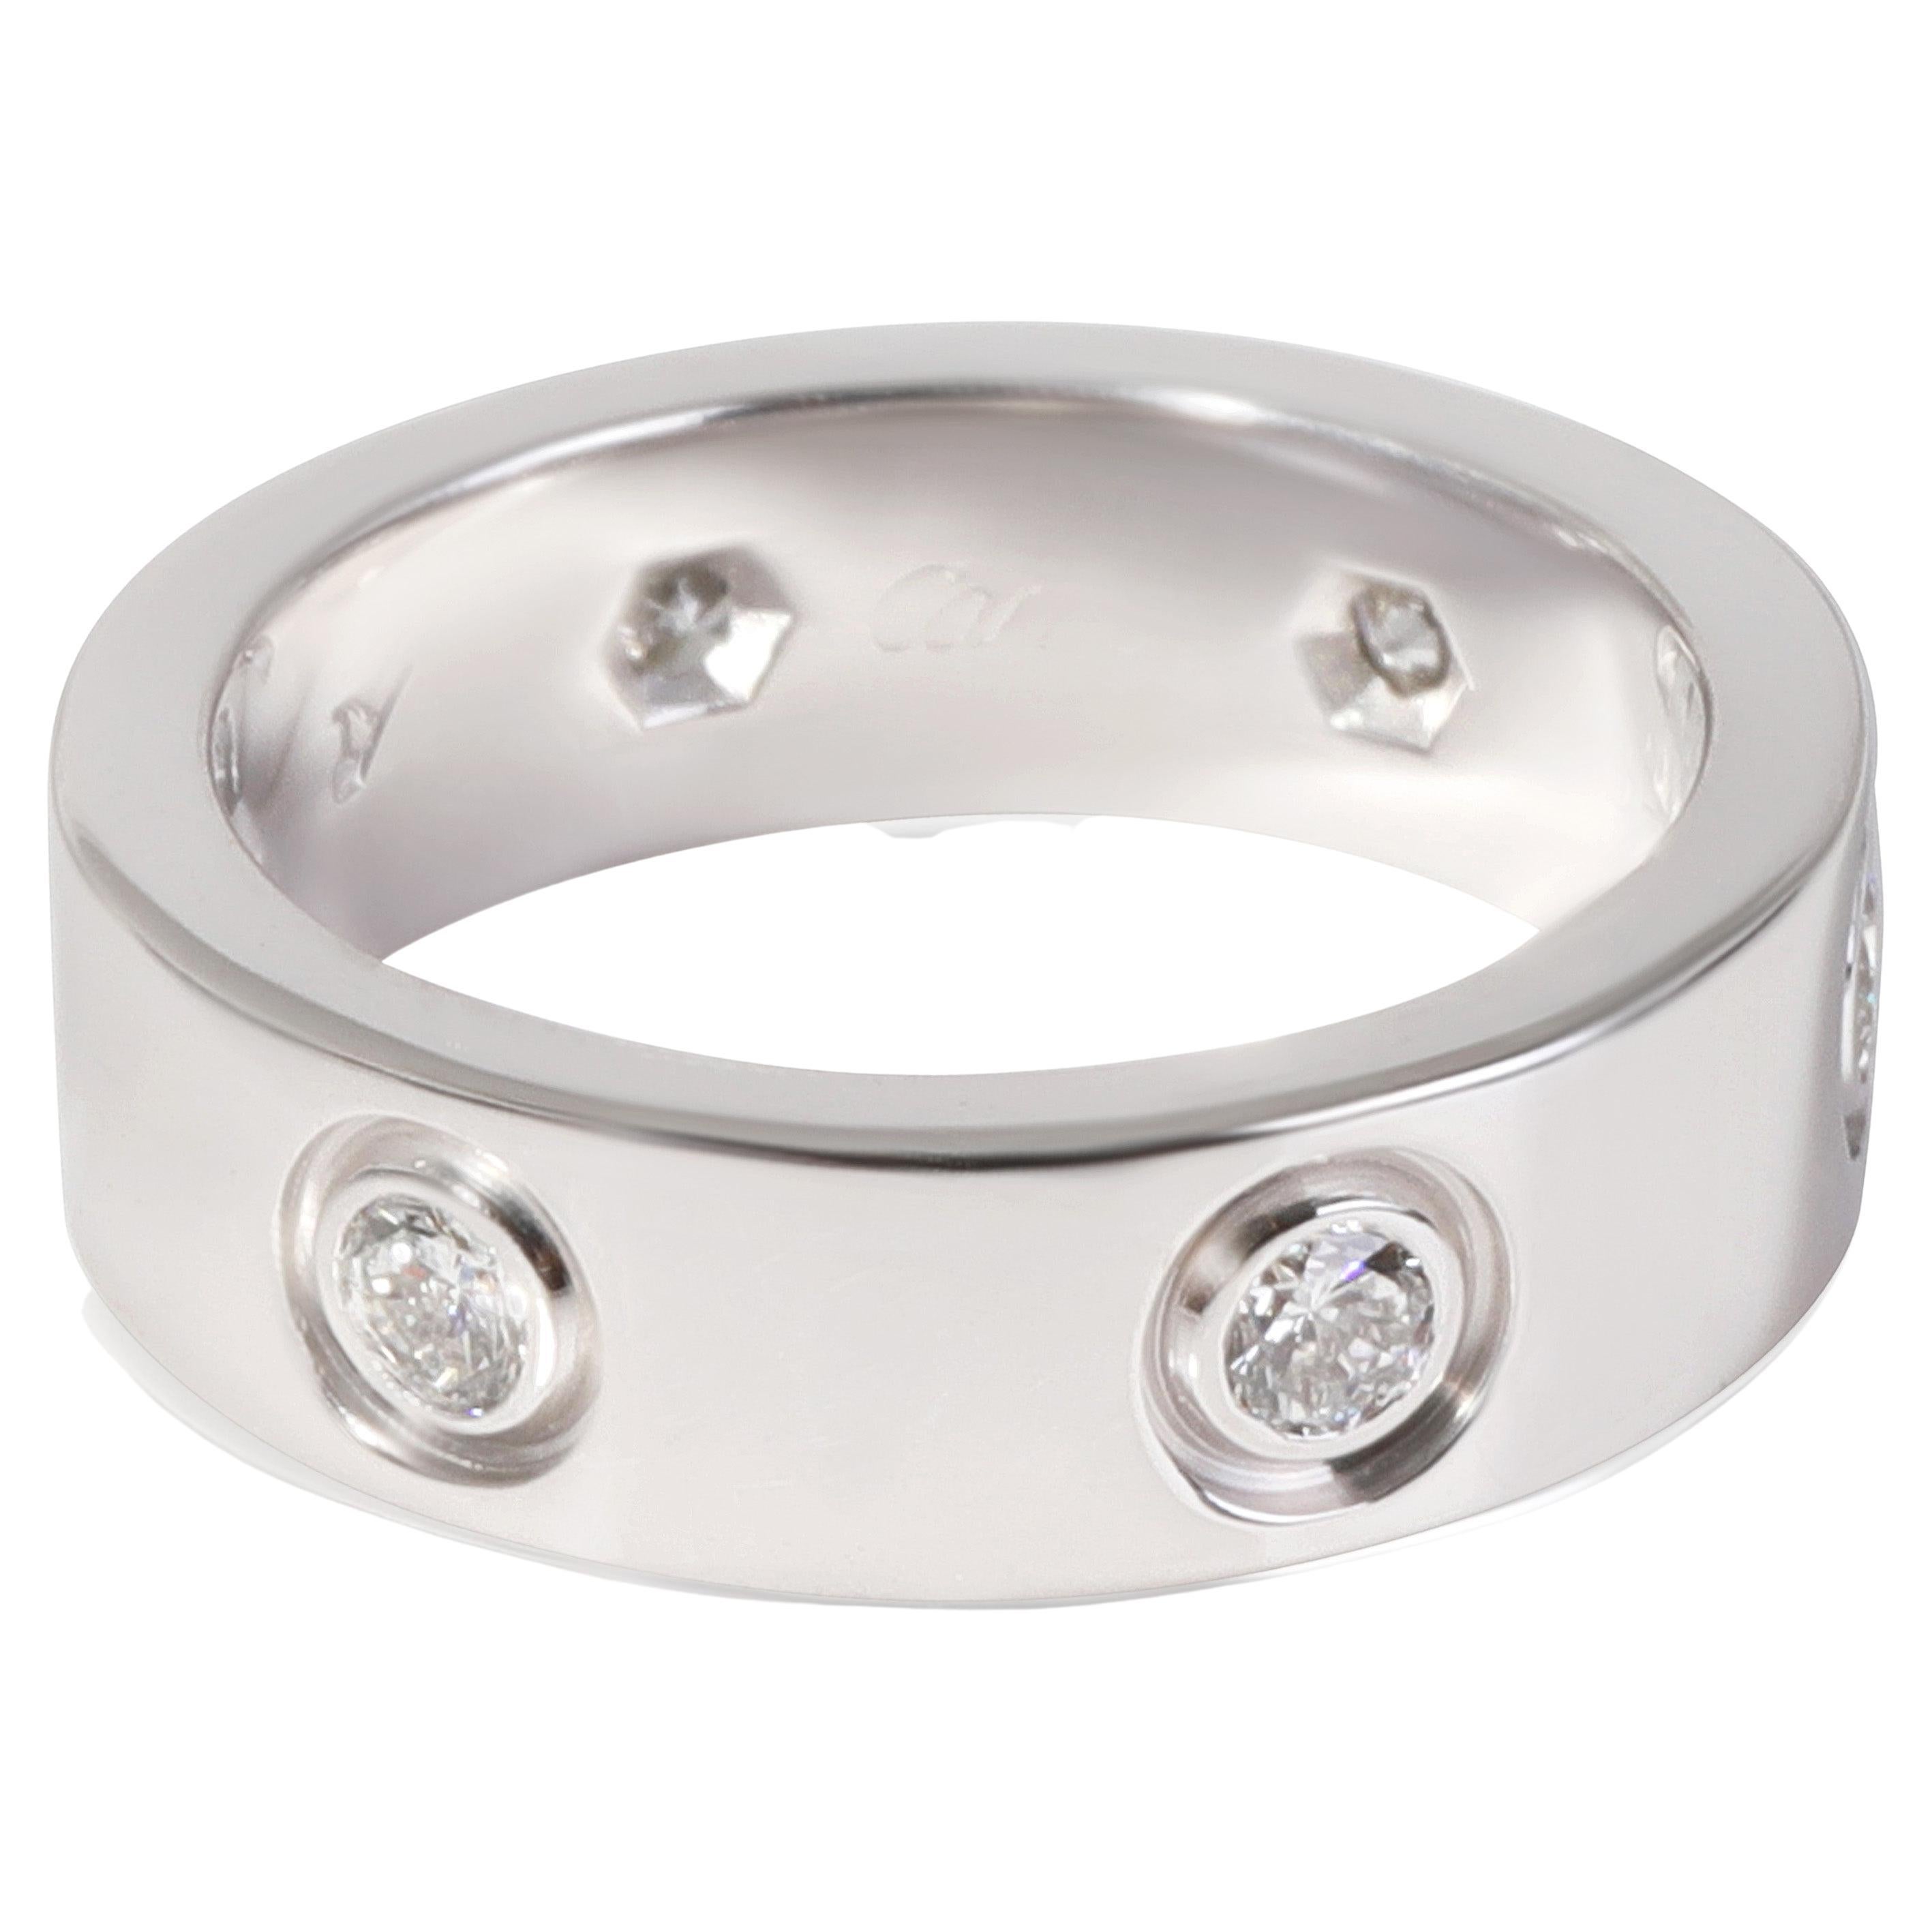 Cartier Love Diamond Ring in 18k White Gold 0.46 CTW For Sale